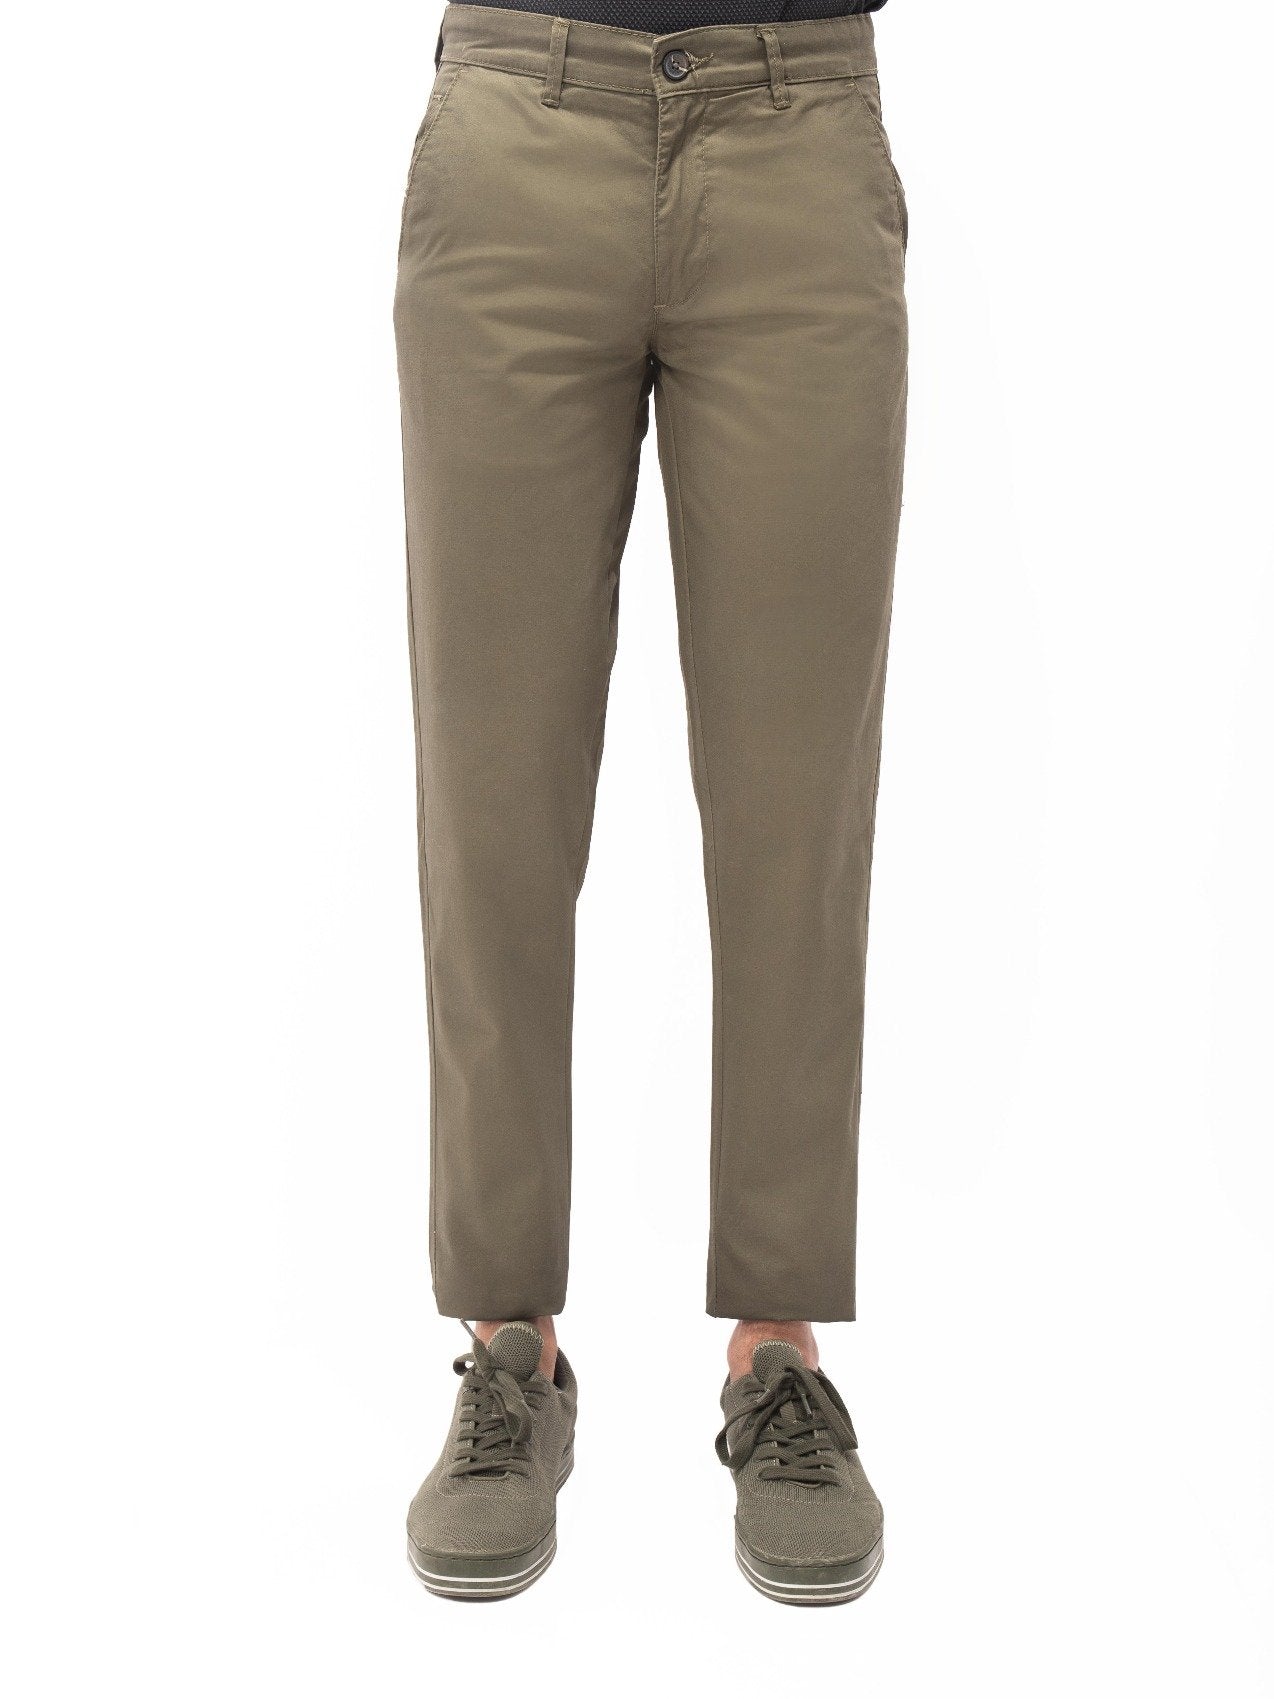 Men's Olive Chino Pant - EMBCP21-003